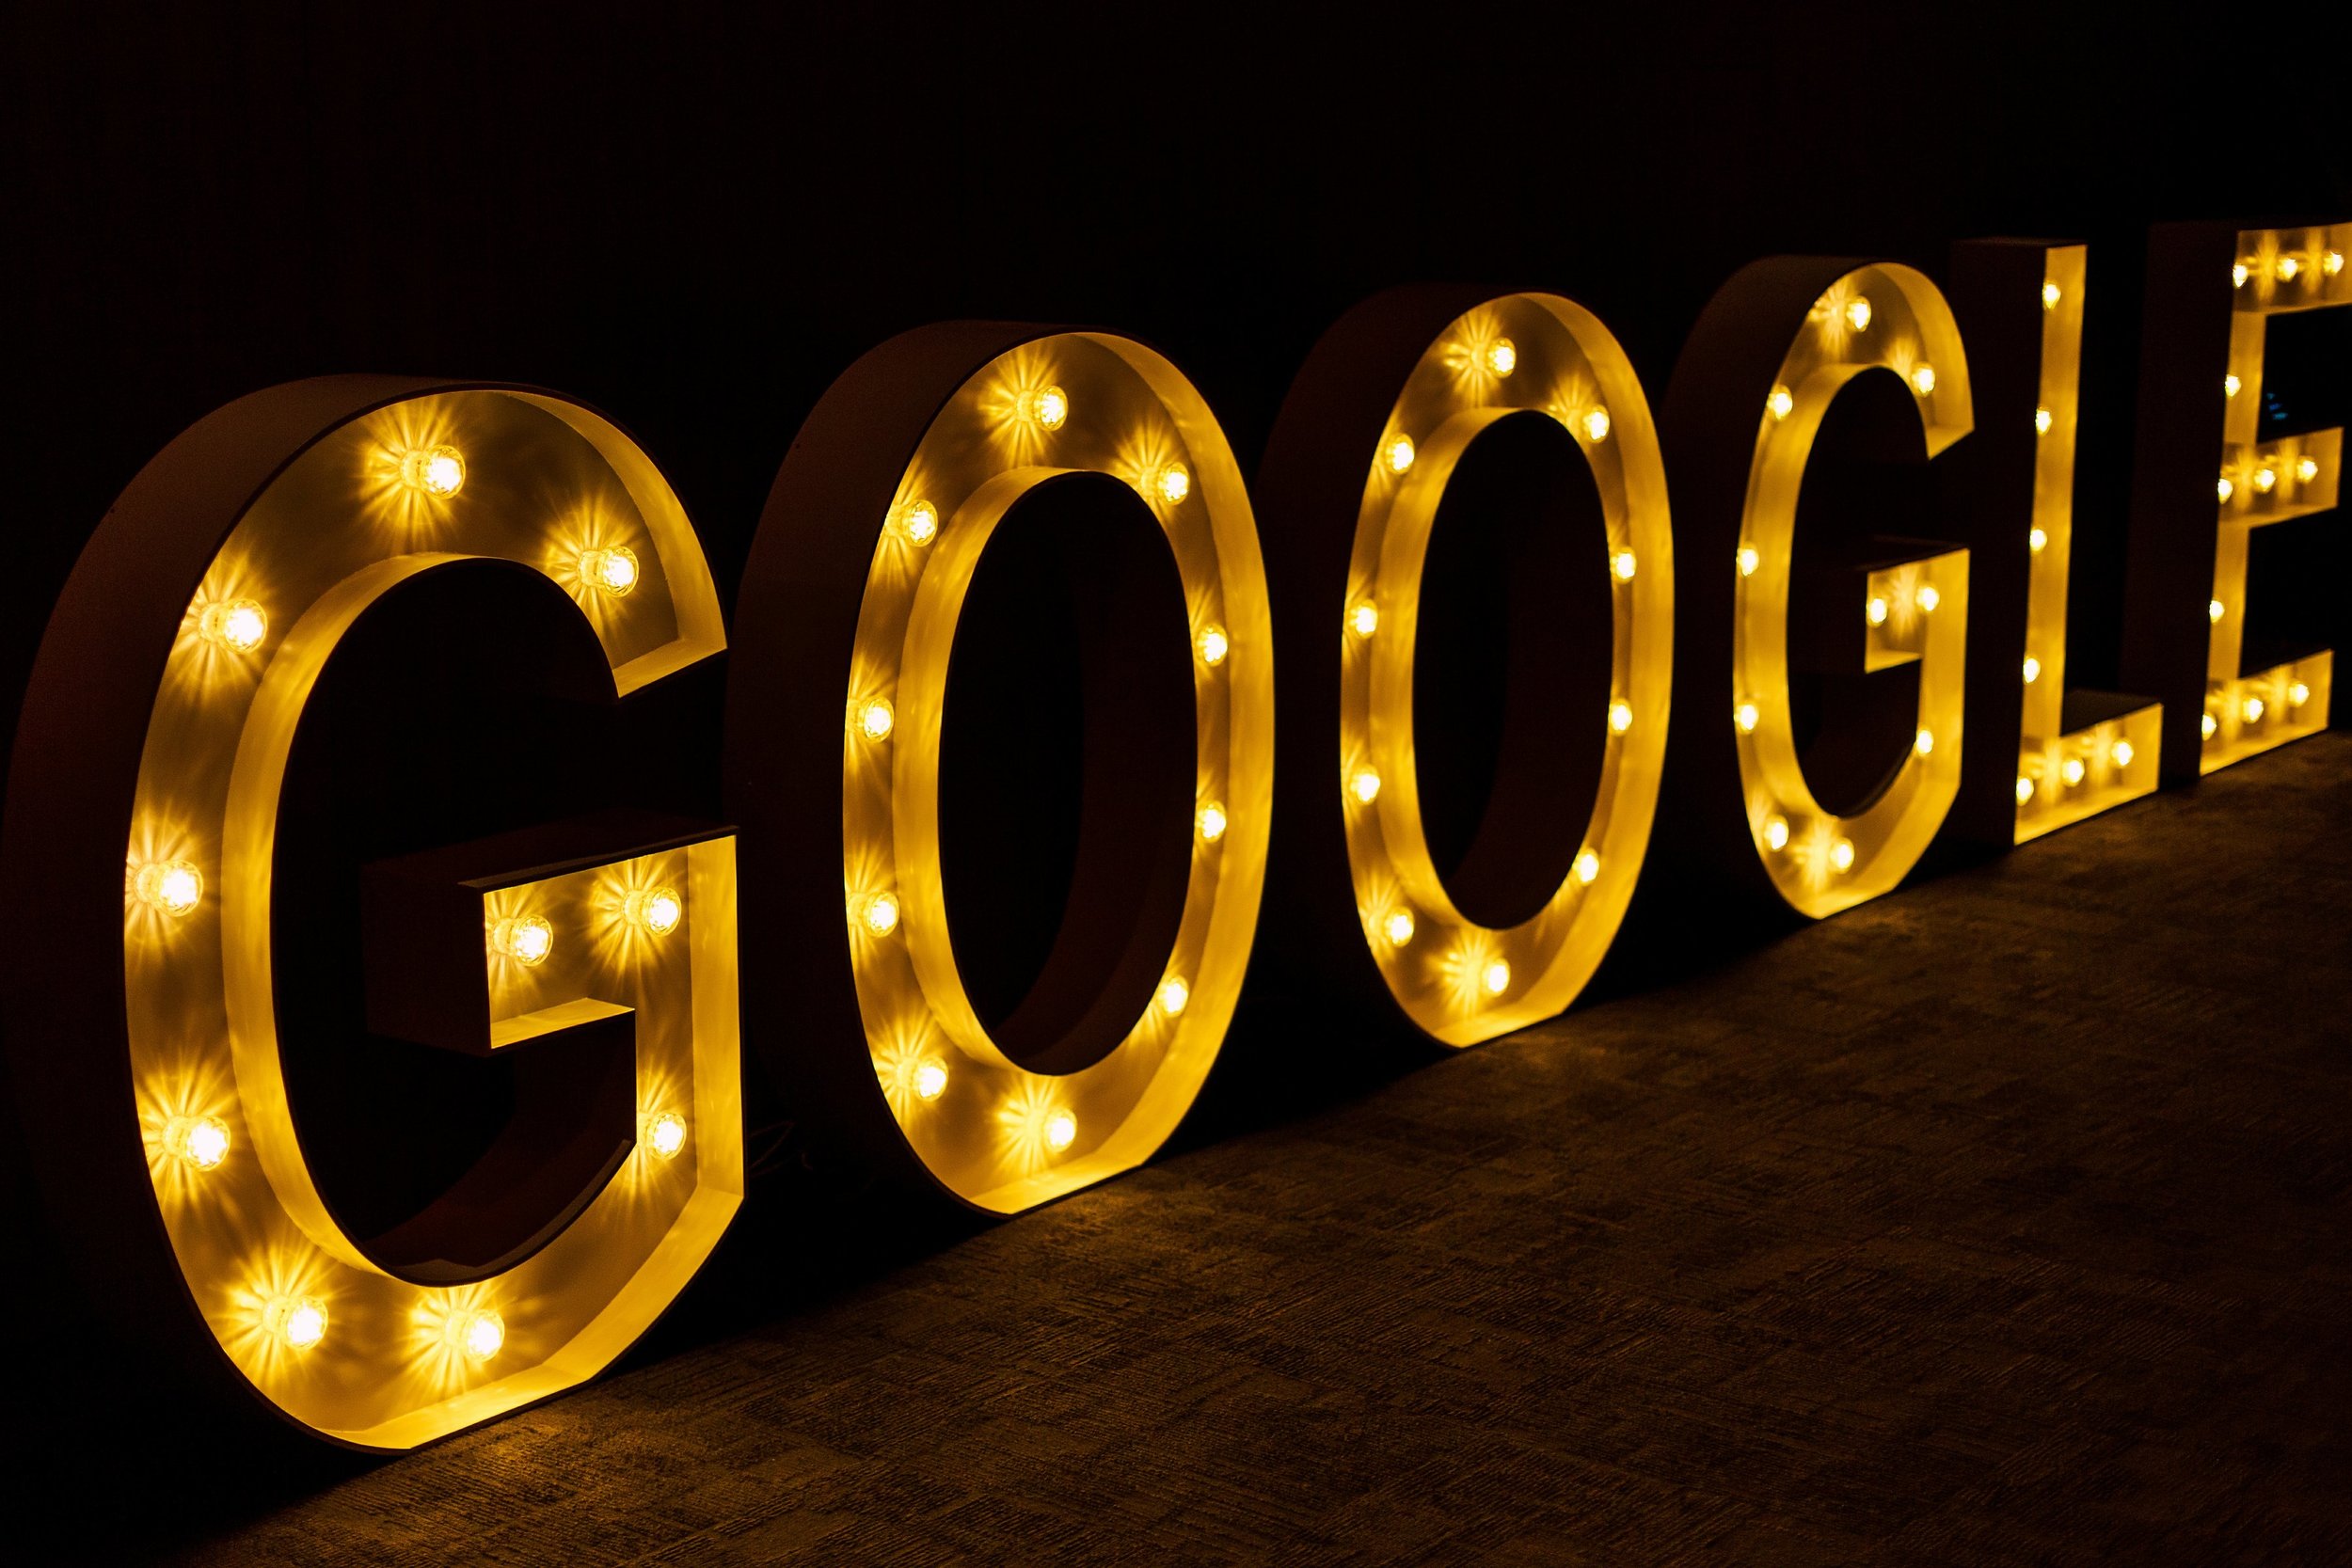 google-local-guides-event-letters-edison-bulbs